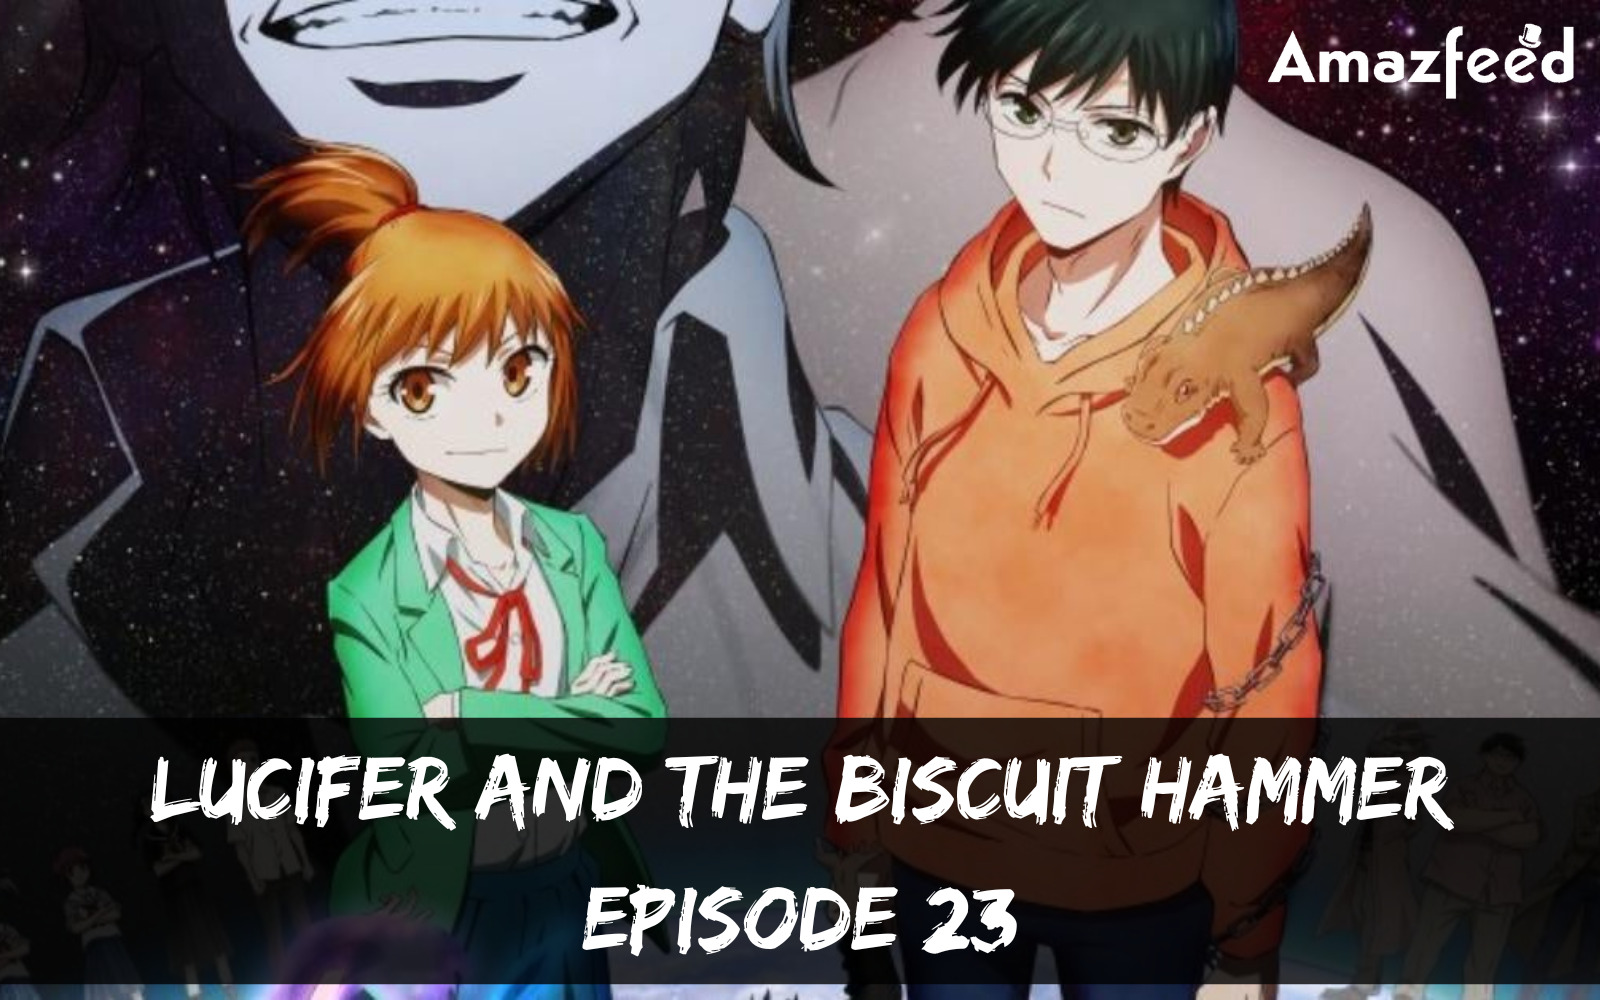 Lucifer and the Biscuit Hammer Episode 23 Release Date